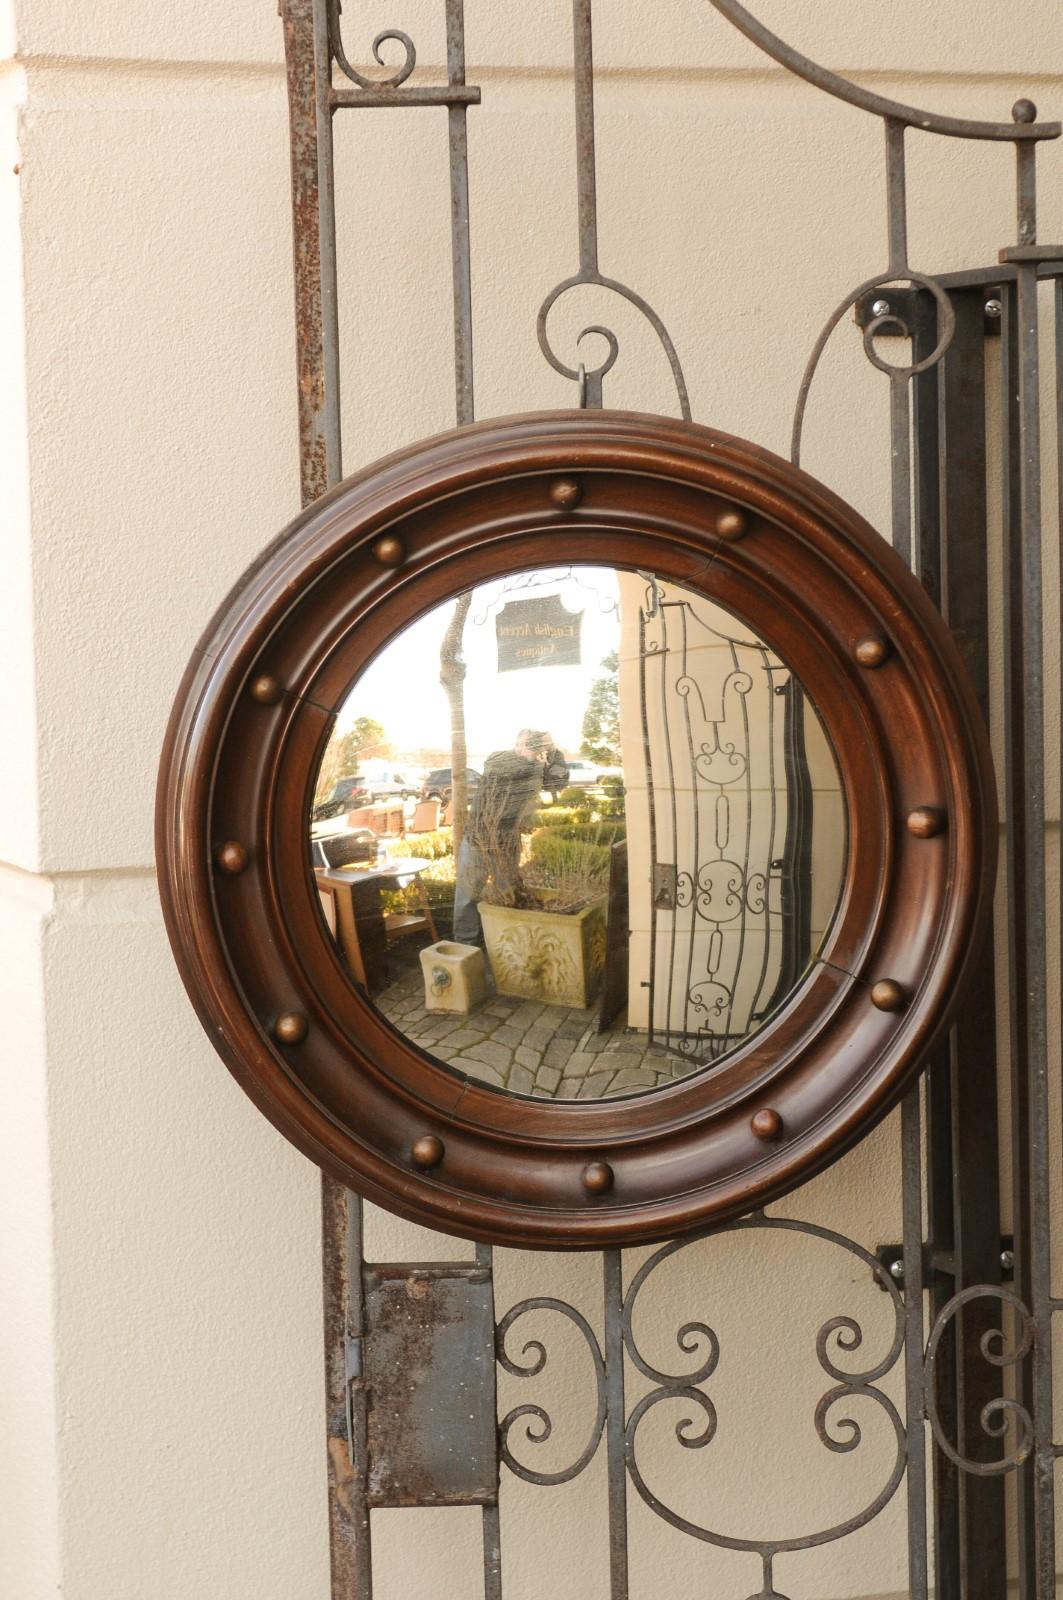 An English vintage wooden girandole bullseye convex mirror from the mid-20th century, with petite spheres. Born in England during the midcentury period, this handsome girandole mirror features a circular molded wooden frame, delicately accented with